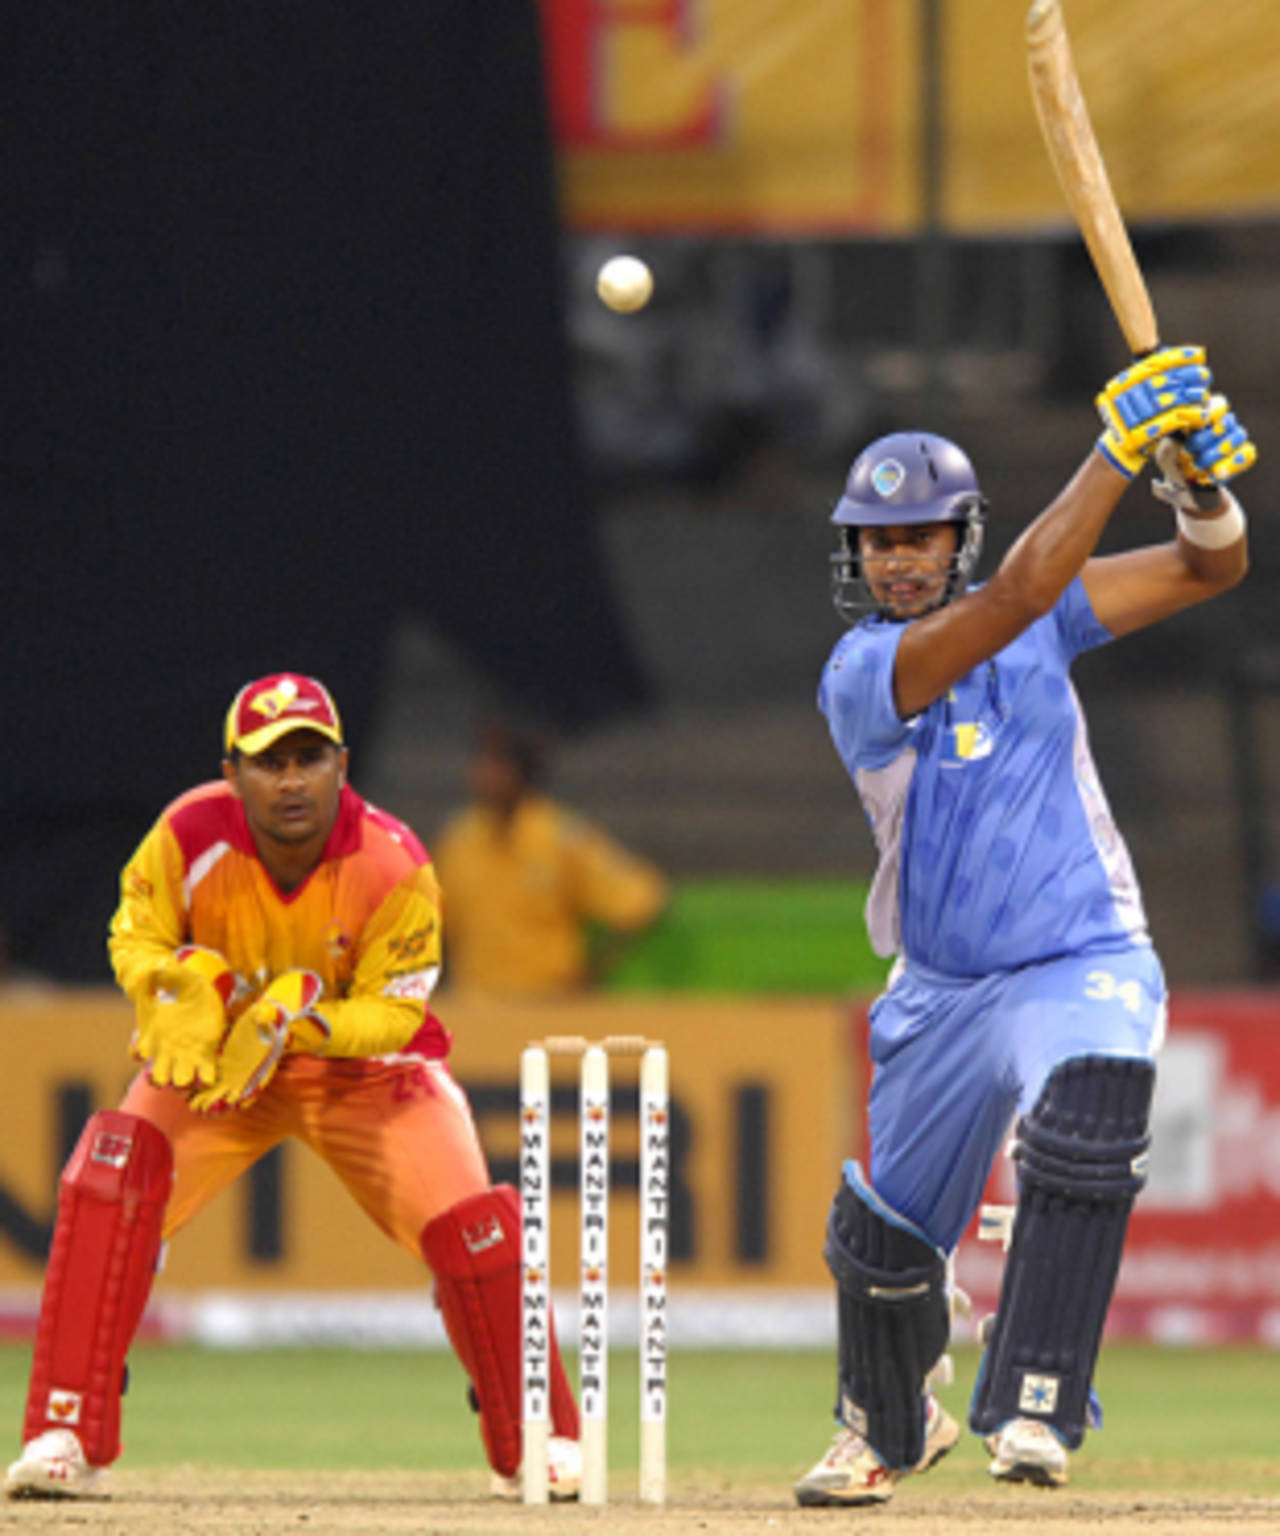 The tournament, with 120 players involved, provides much-needed exposure to reach the next level&nbsp;&nbsp;&bull;&nbsp;&nbsp;ESPNcricinfo Ltd